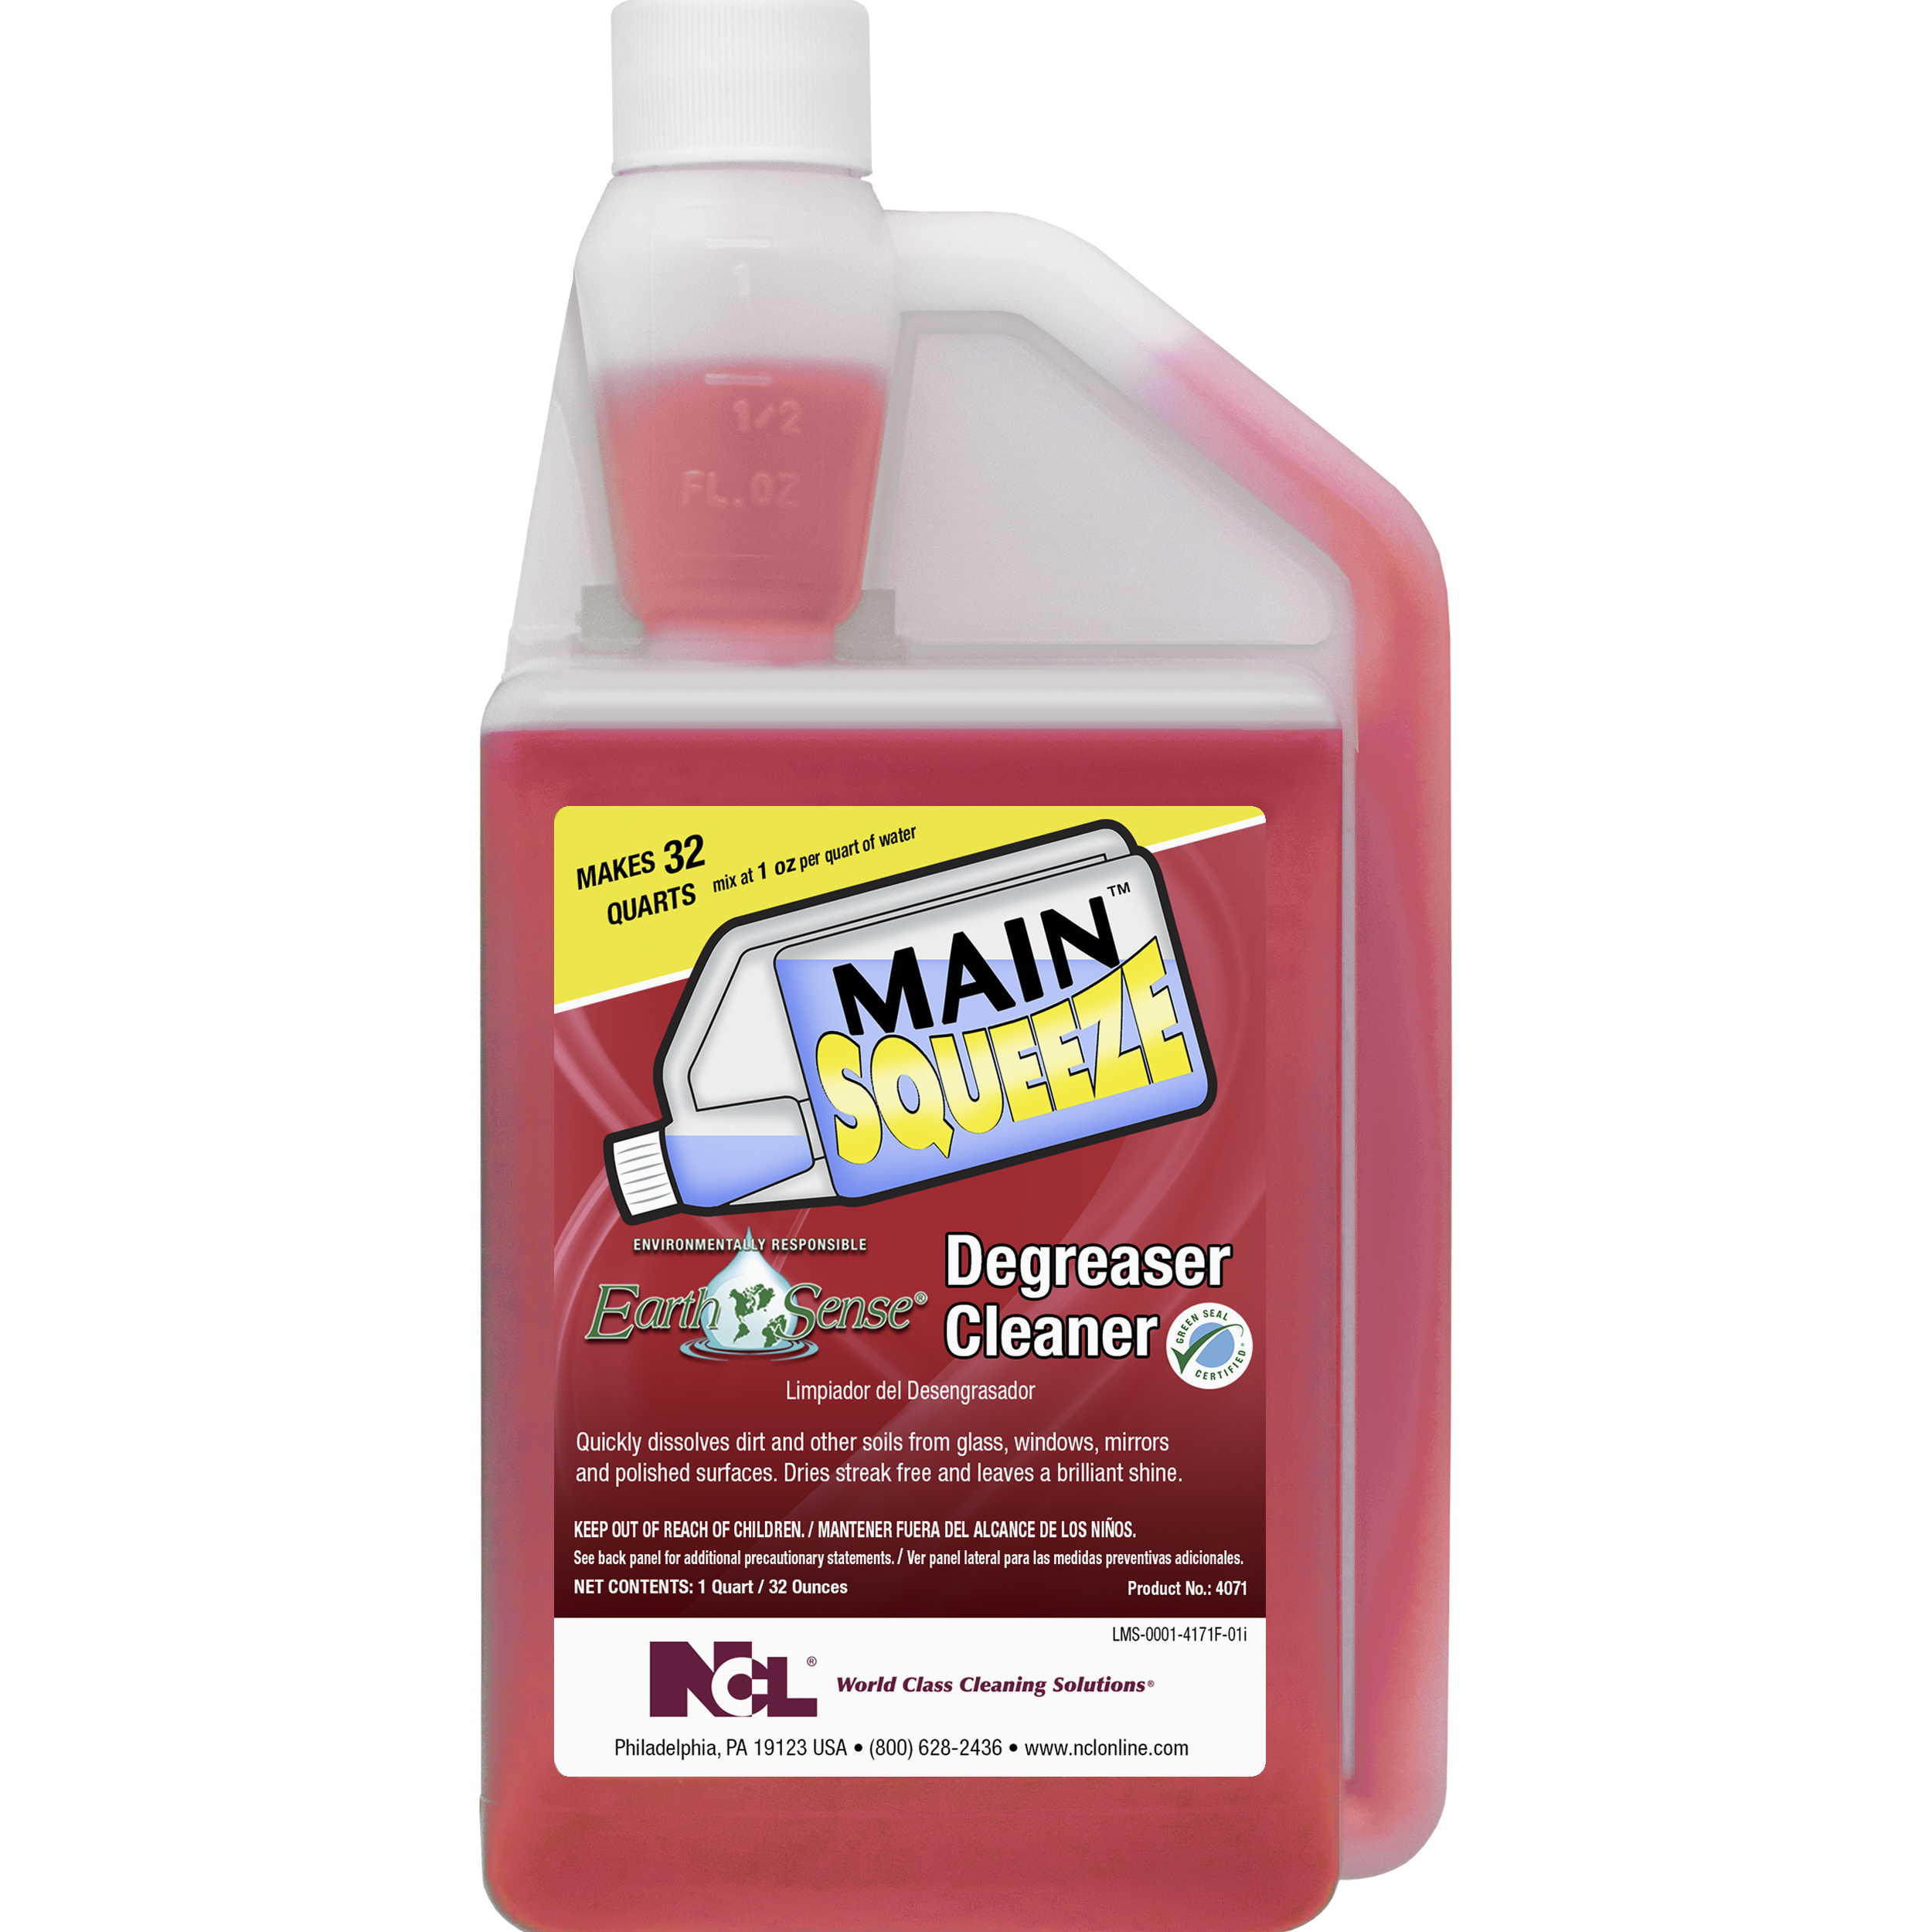  MAIN SQUEEZE Earth Sense Degreaser Cleaner. 6/32 oz (1 Qt.) Case (NCL4171-49) 